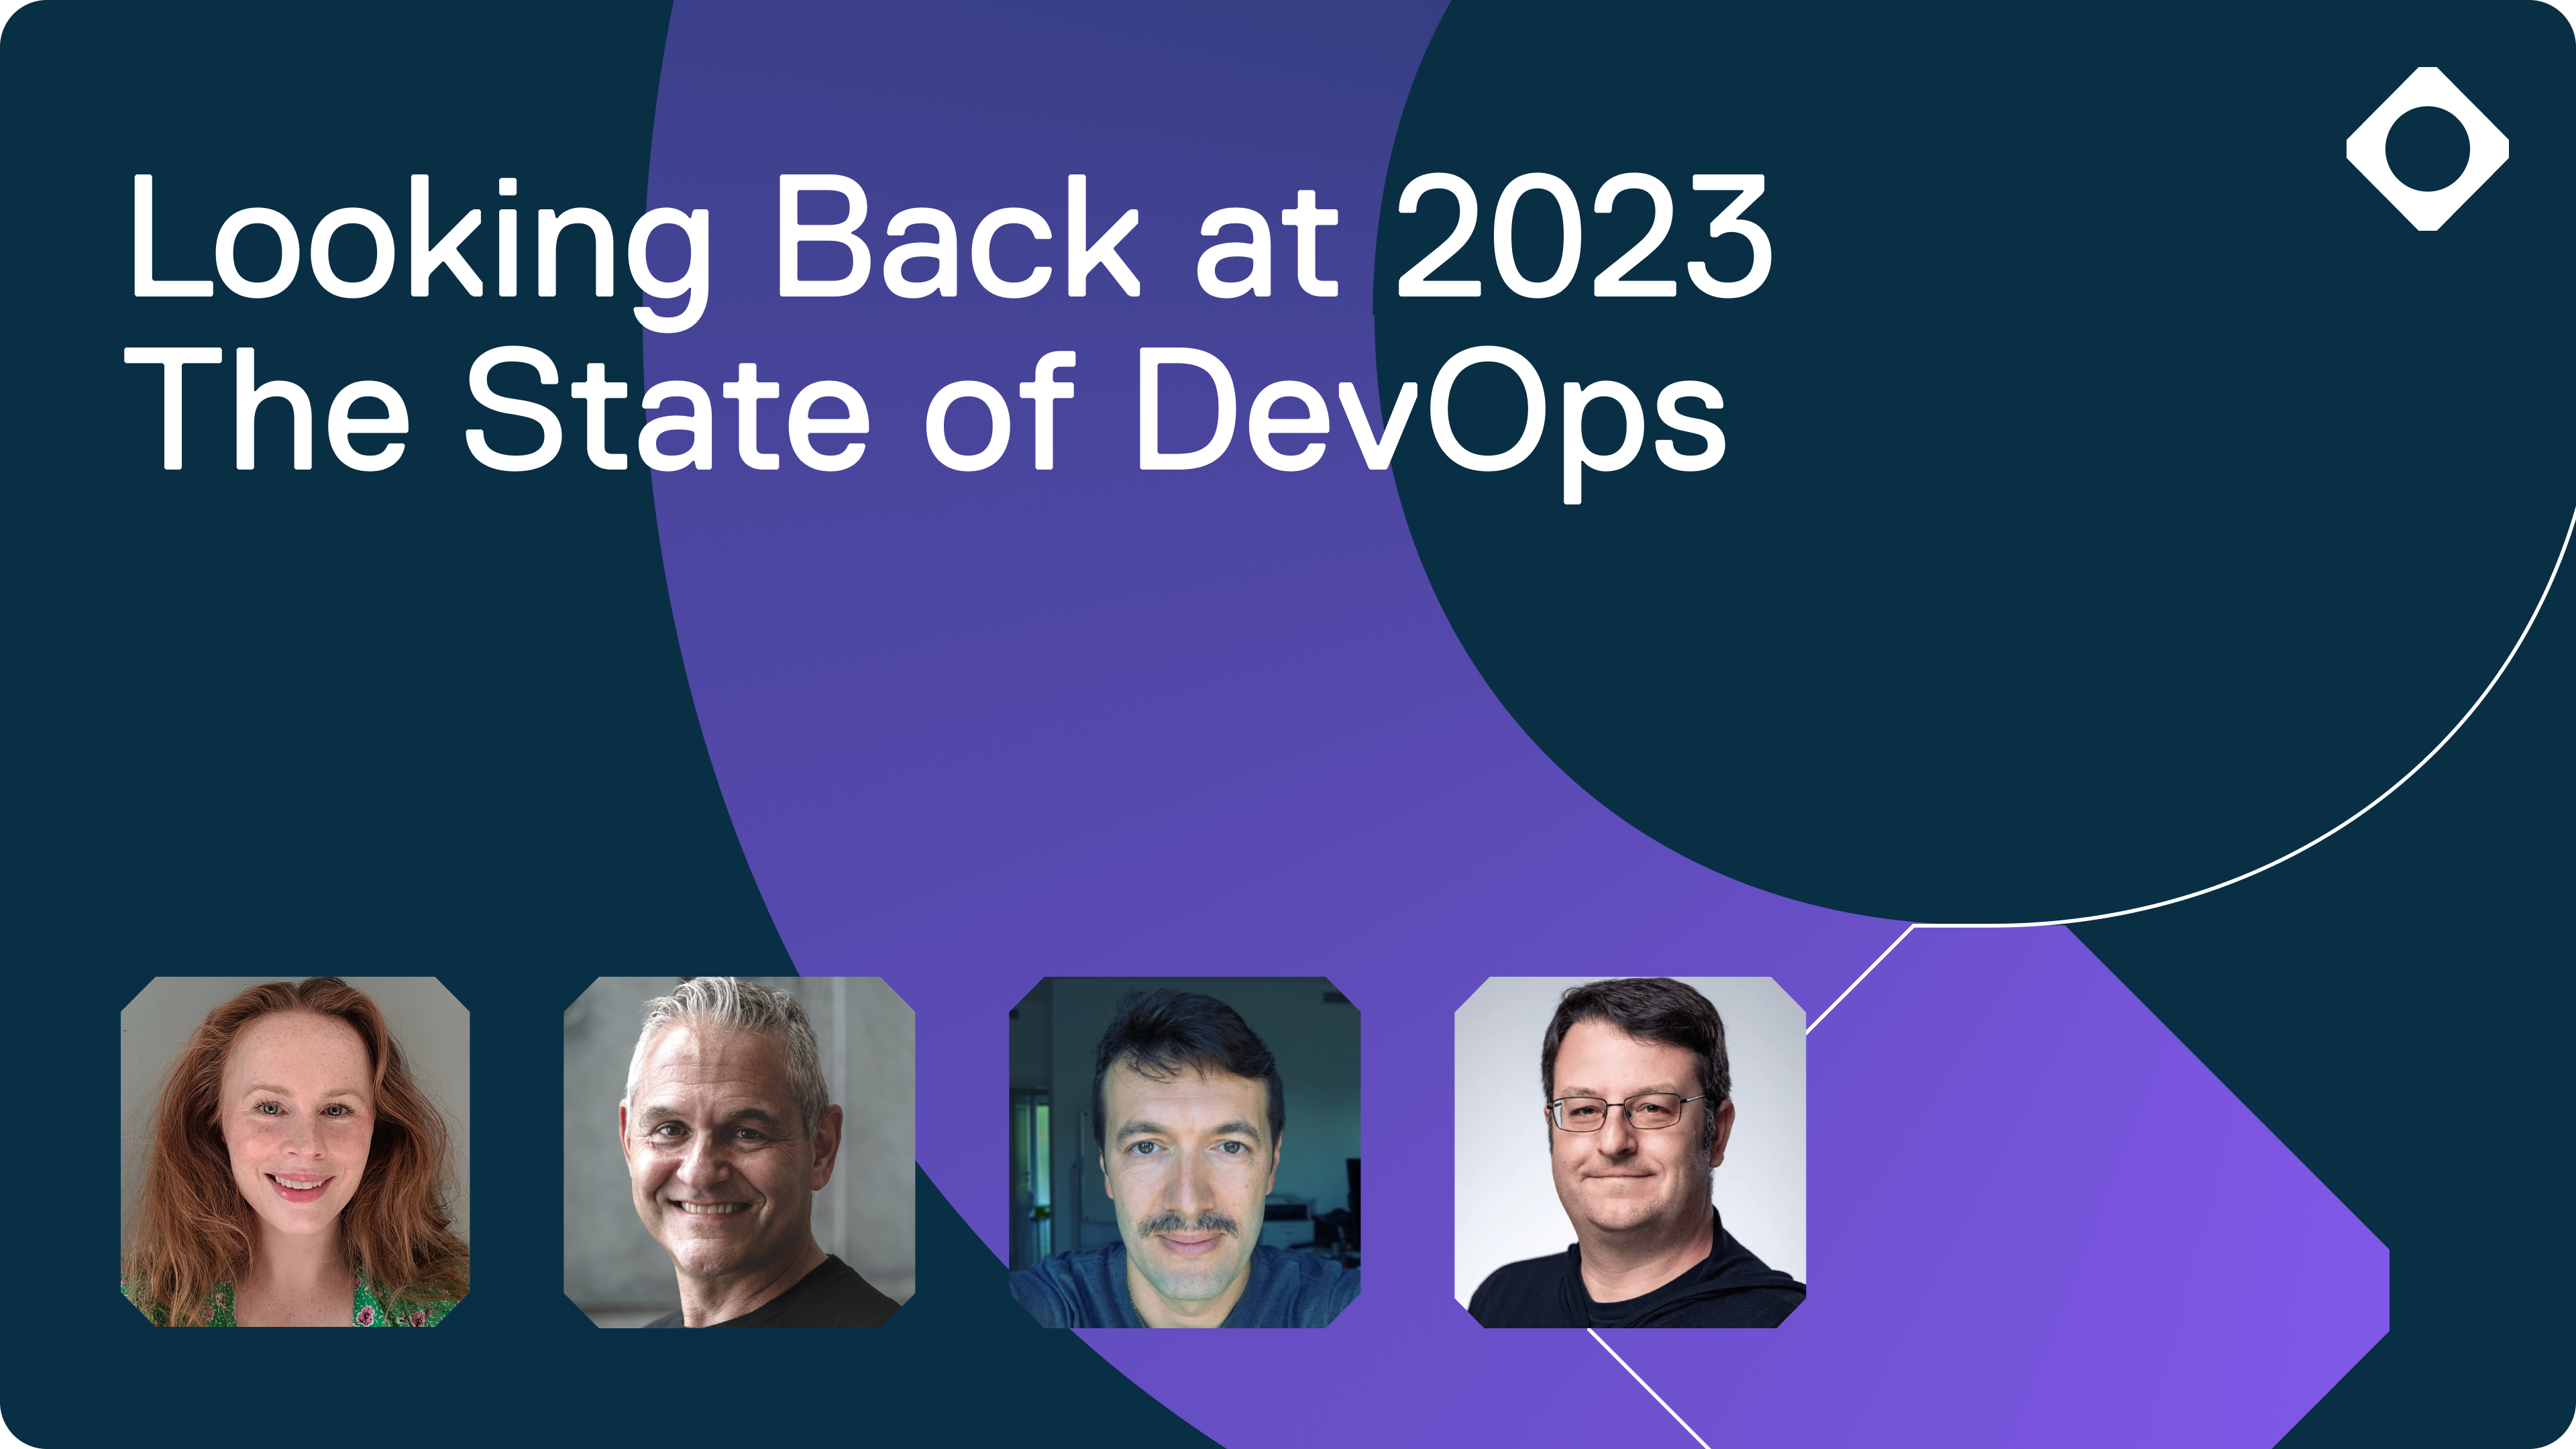 Looking back at 2023: The State of DevOps